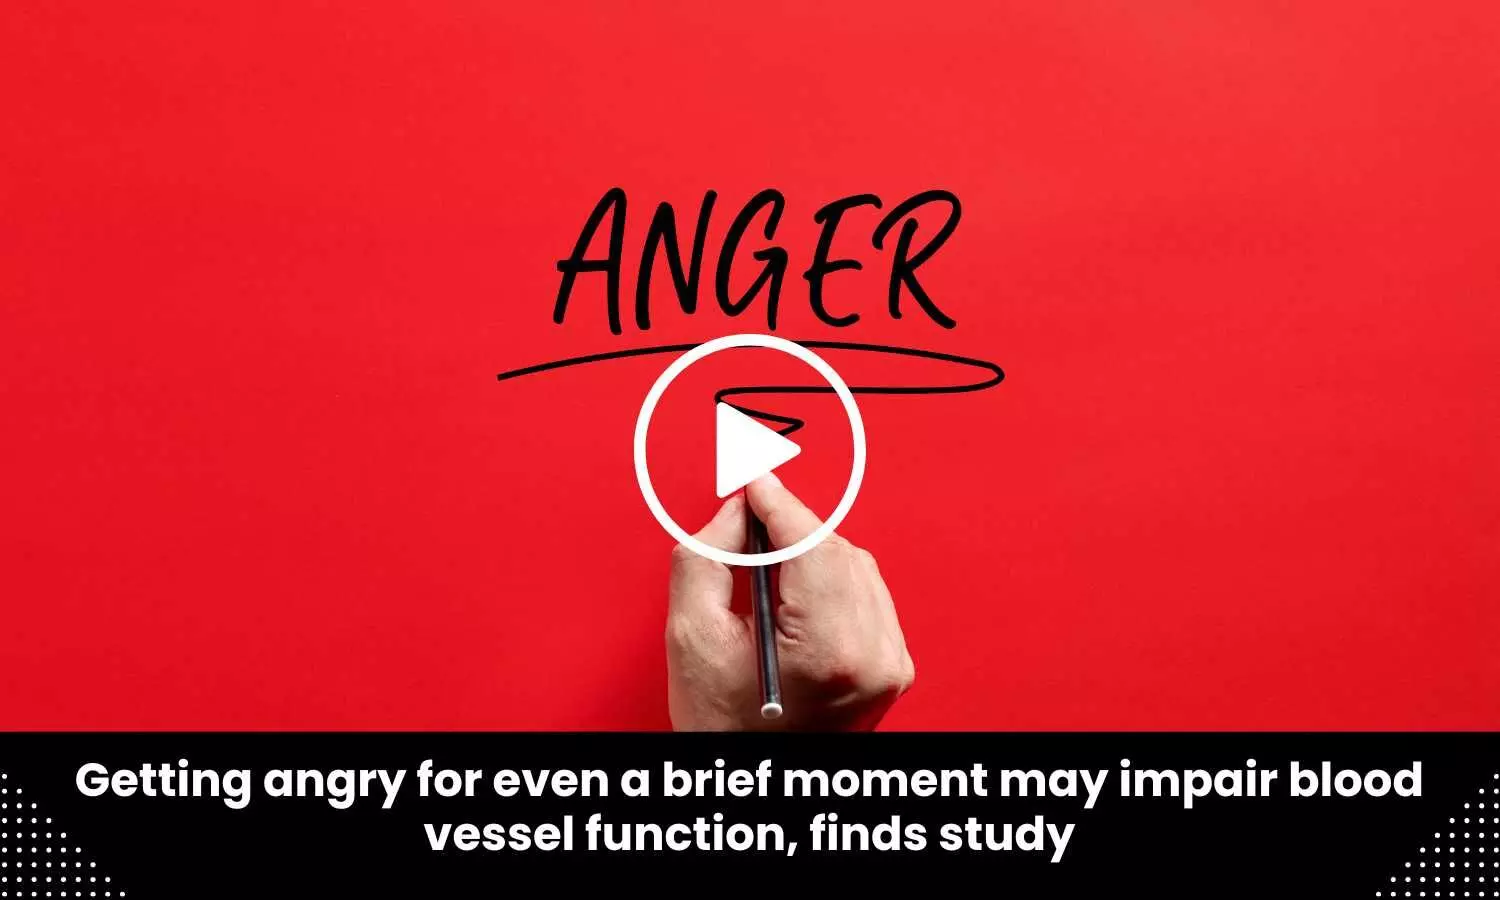 Getting angry for even a brief moment may impair blood vessel function, finds study